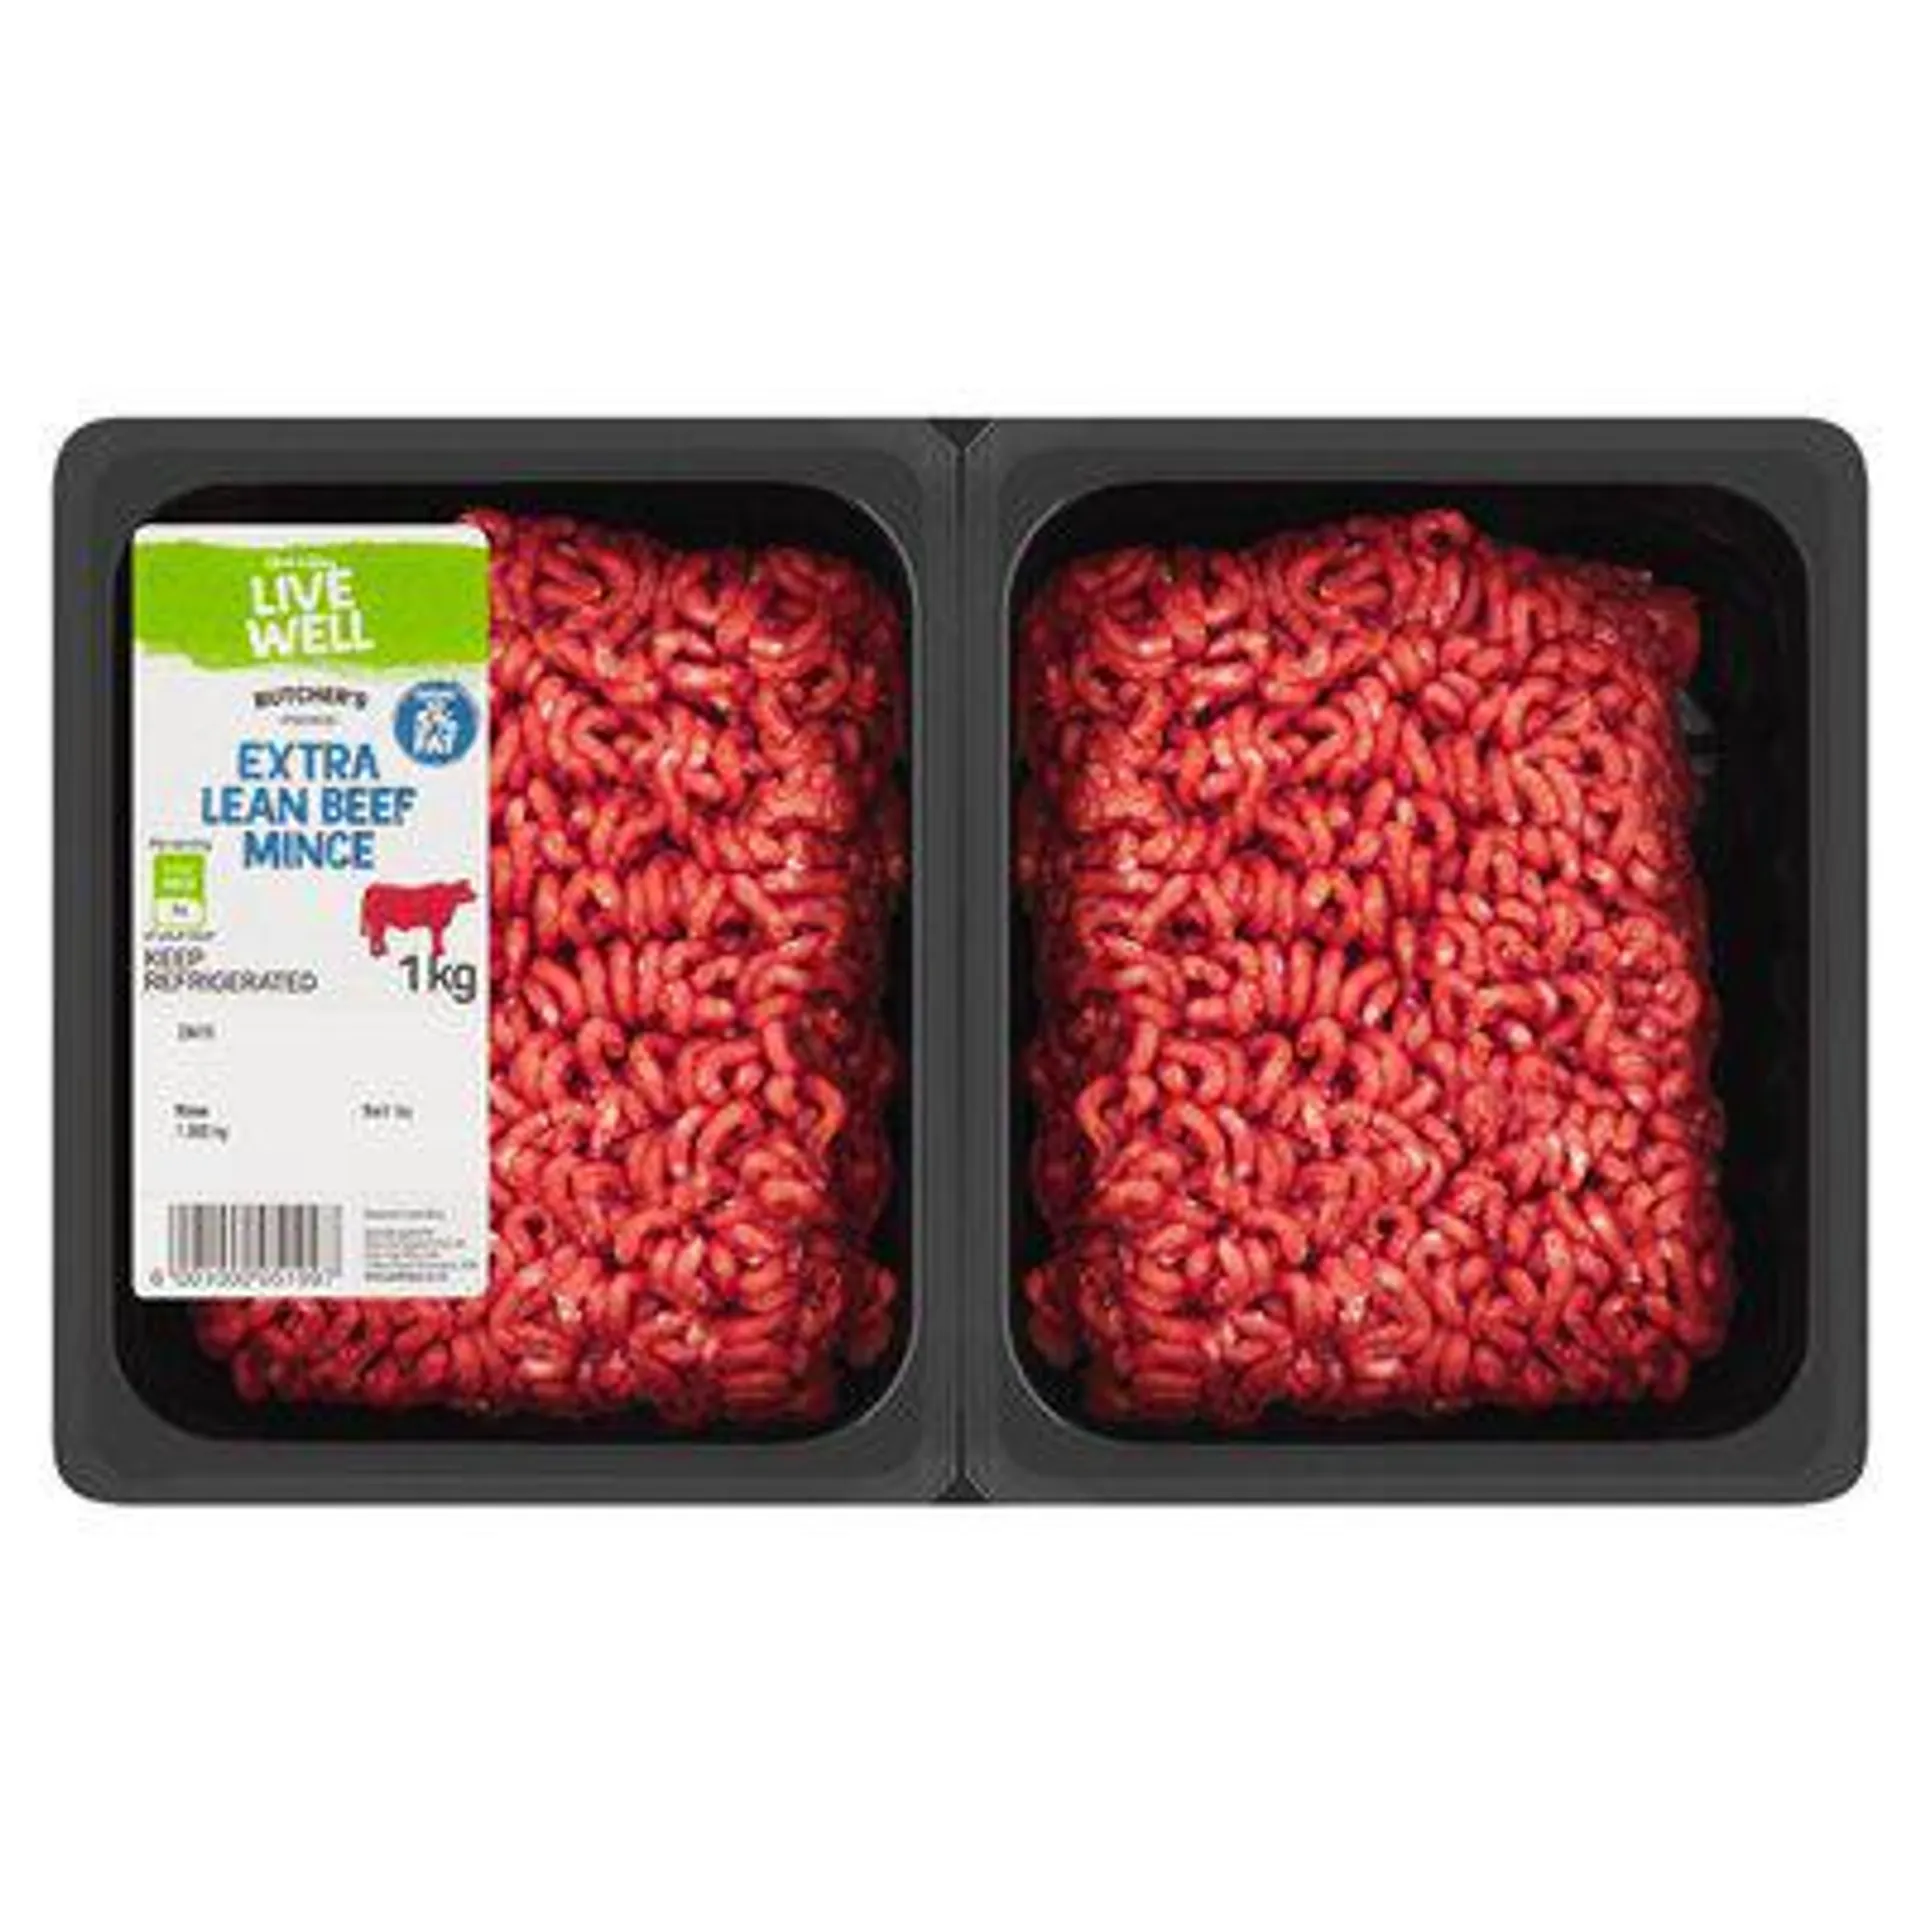 PnP Live Well Extra Lean Beef Mince 1kg